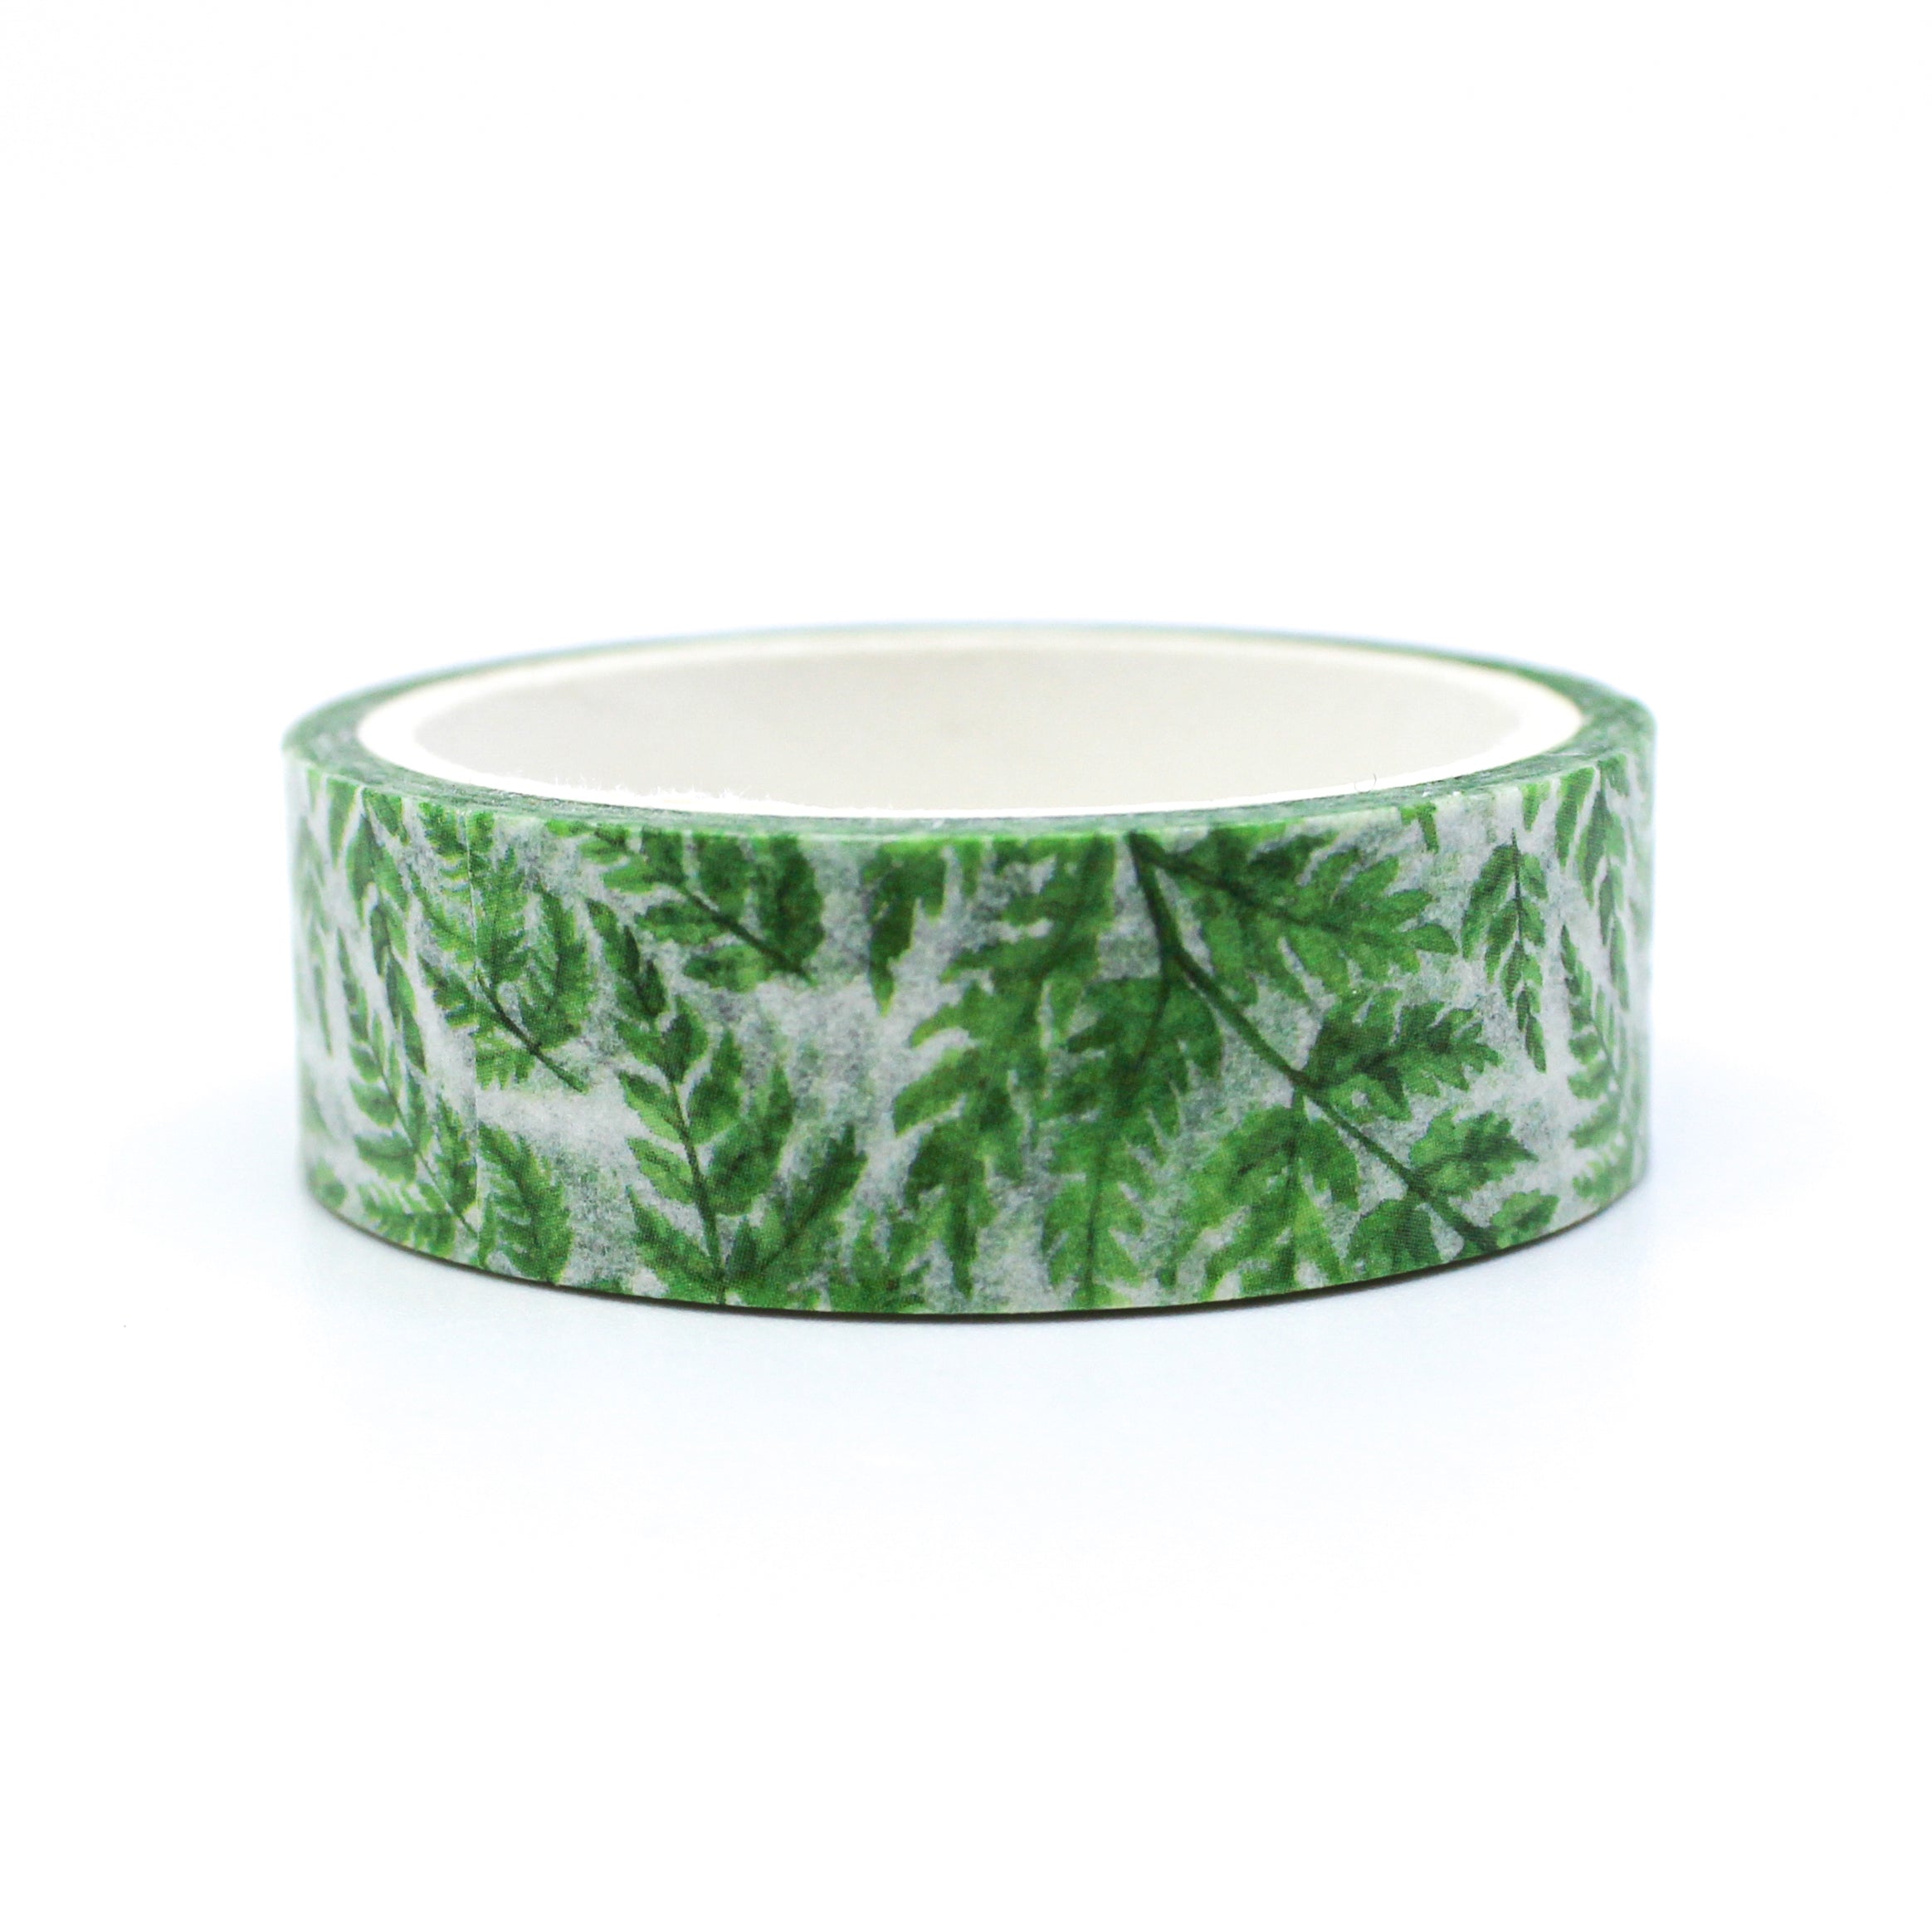 This a green fern leaves pattern washi tape from BBB Supplies Craft Shop